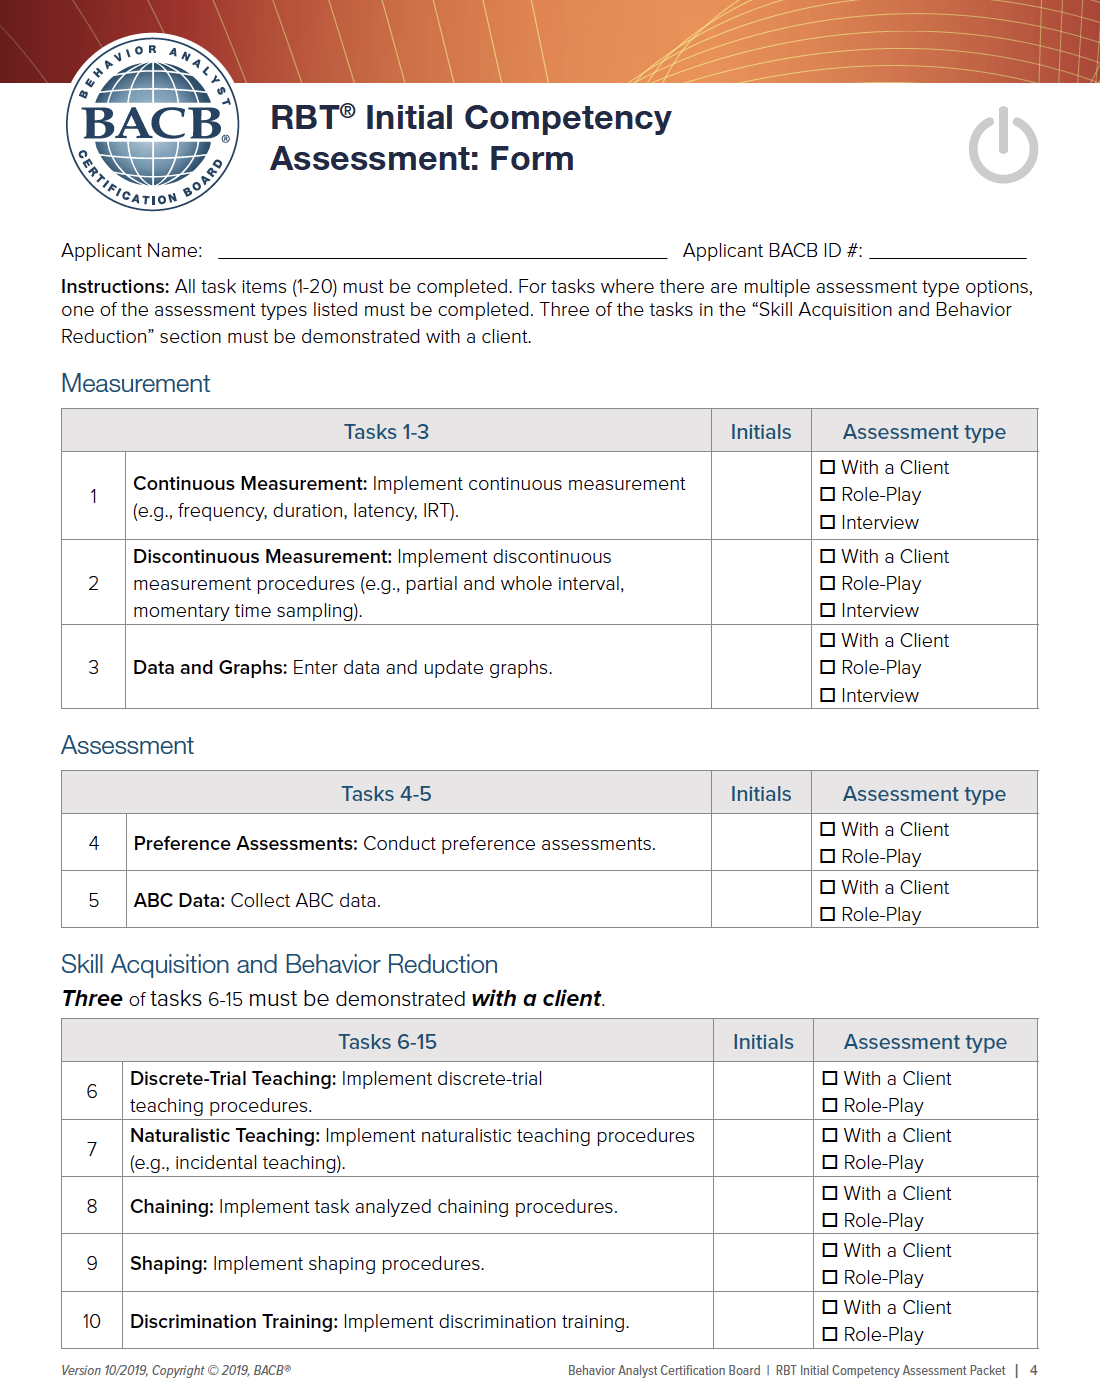 RBT Initial Competency Assessment Form